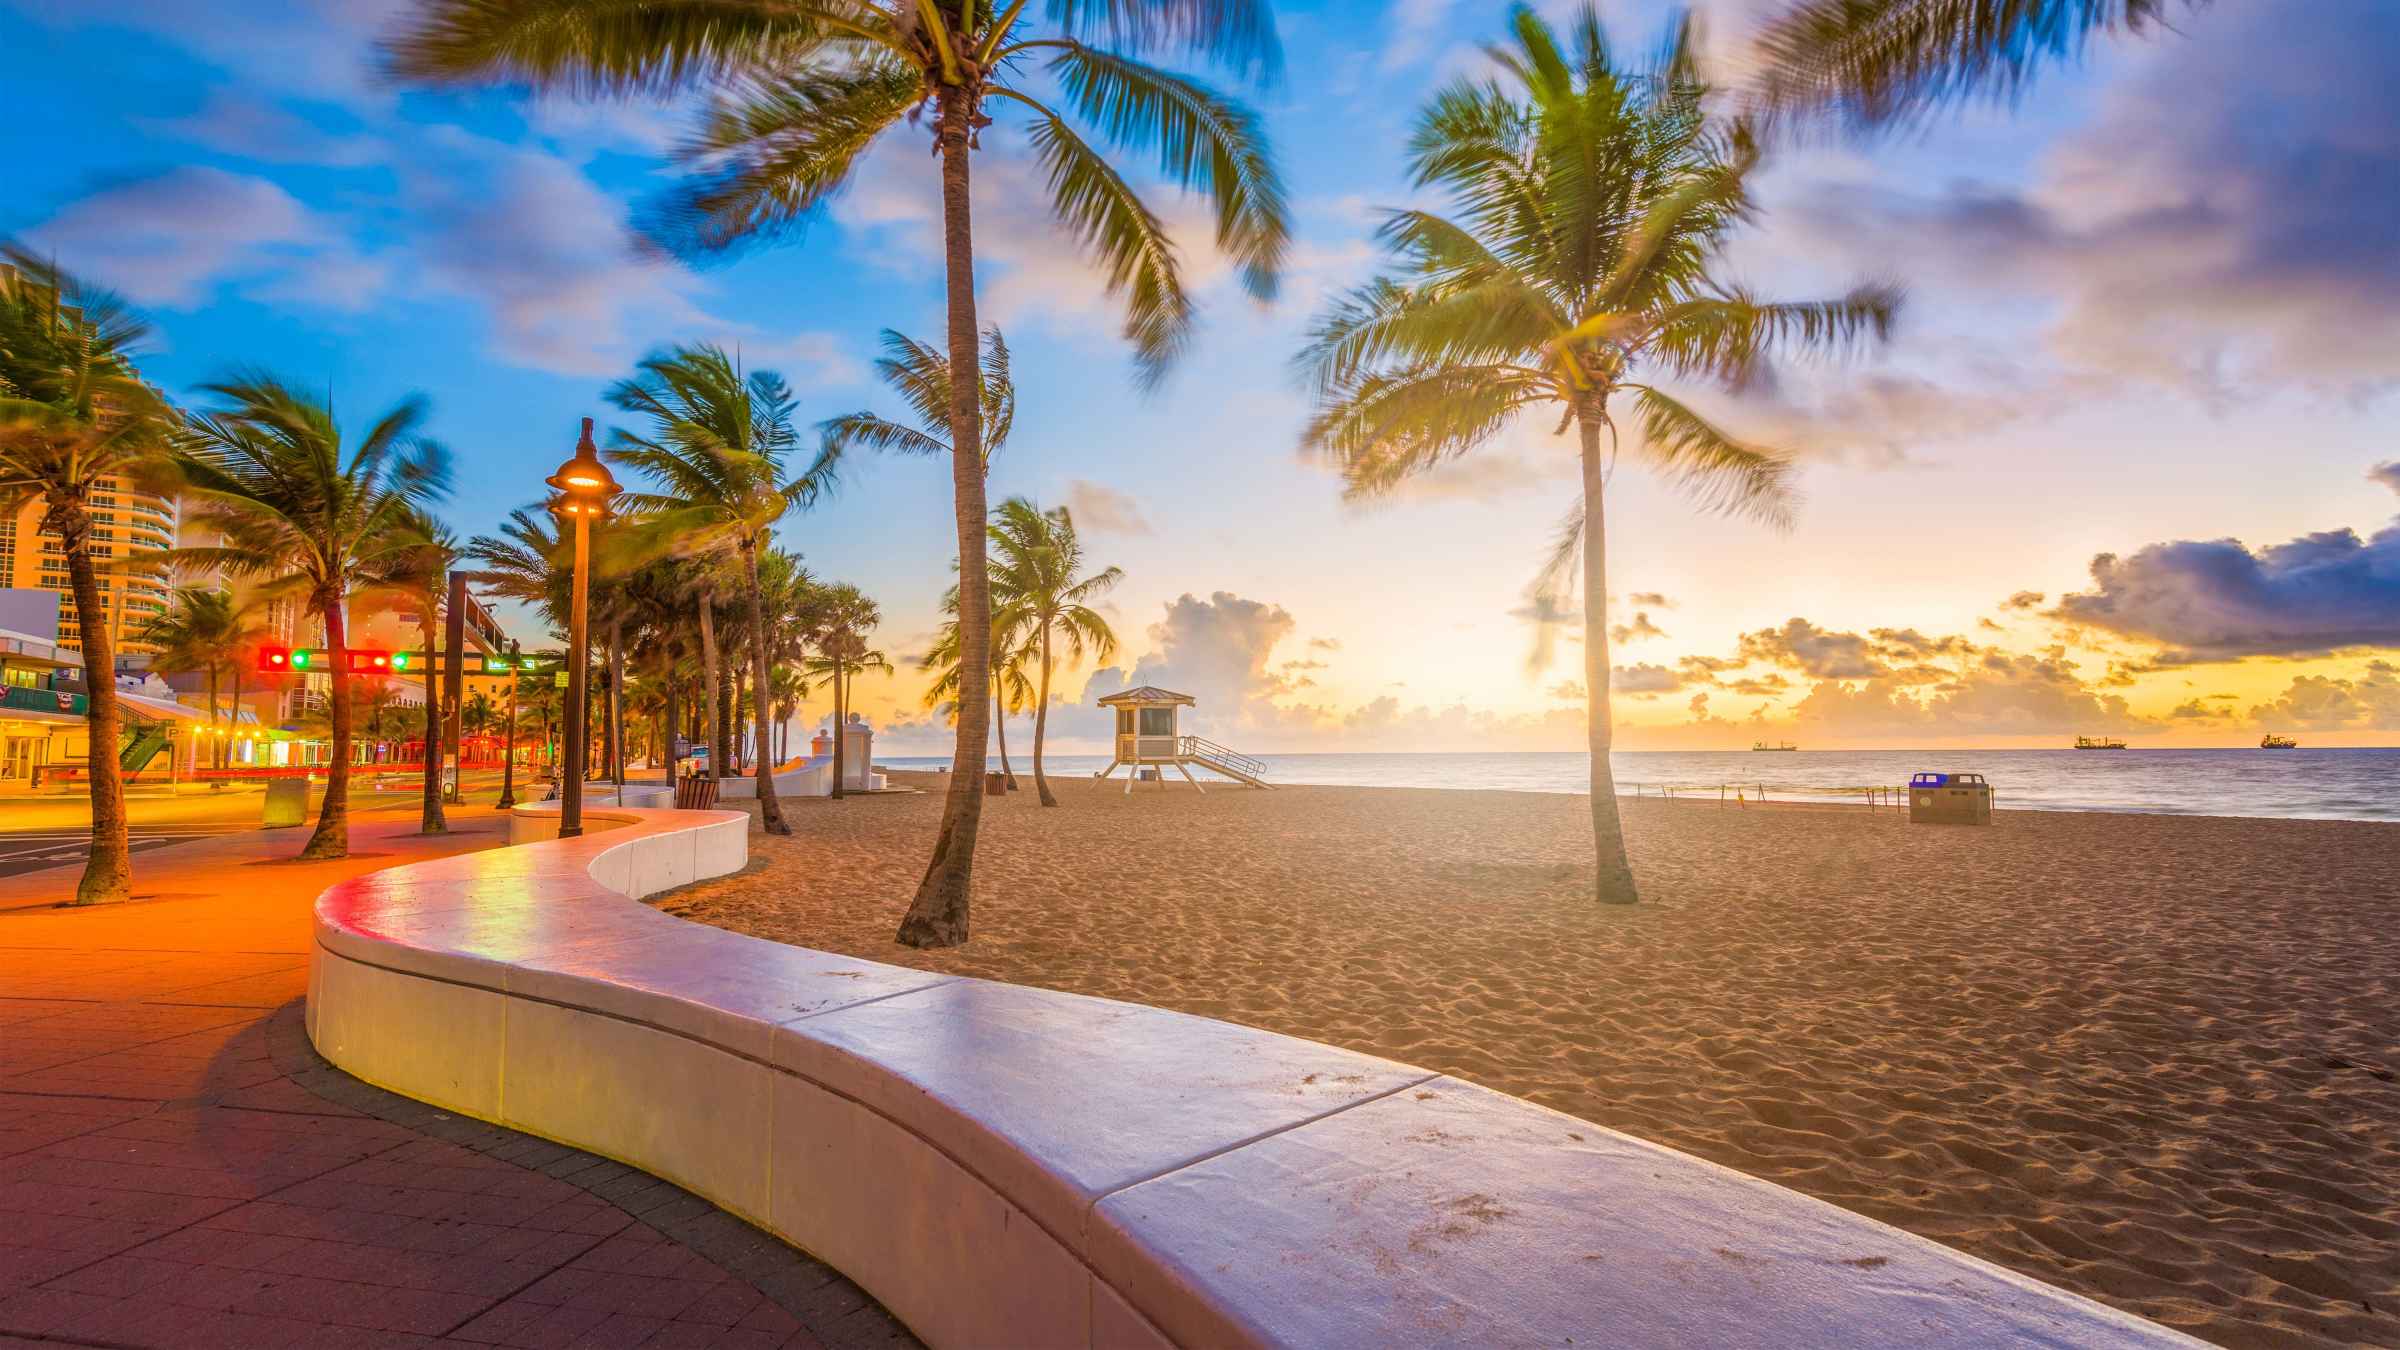 The BEST Fort Lauderdale Tours and Things to Do in 2022 FREE